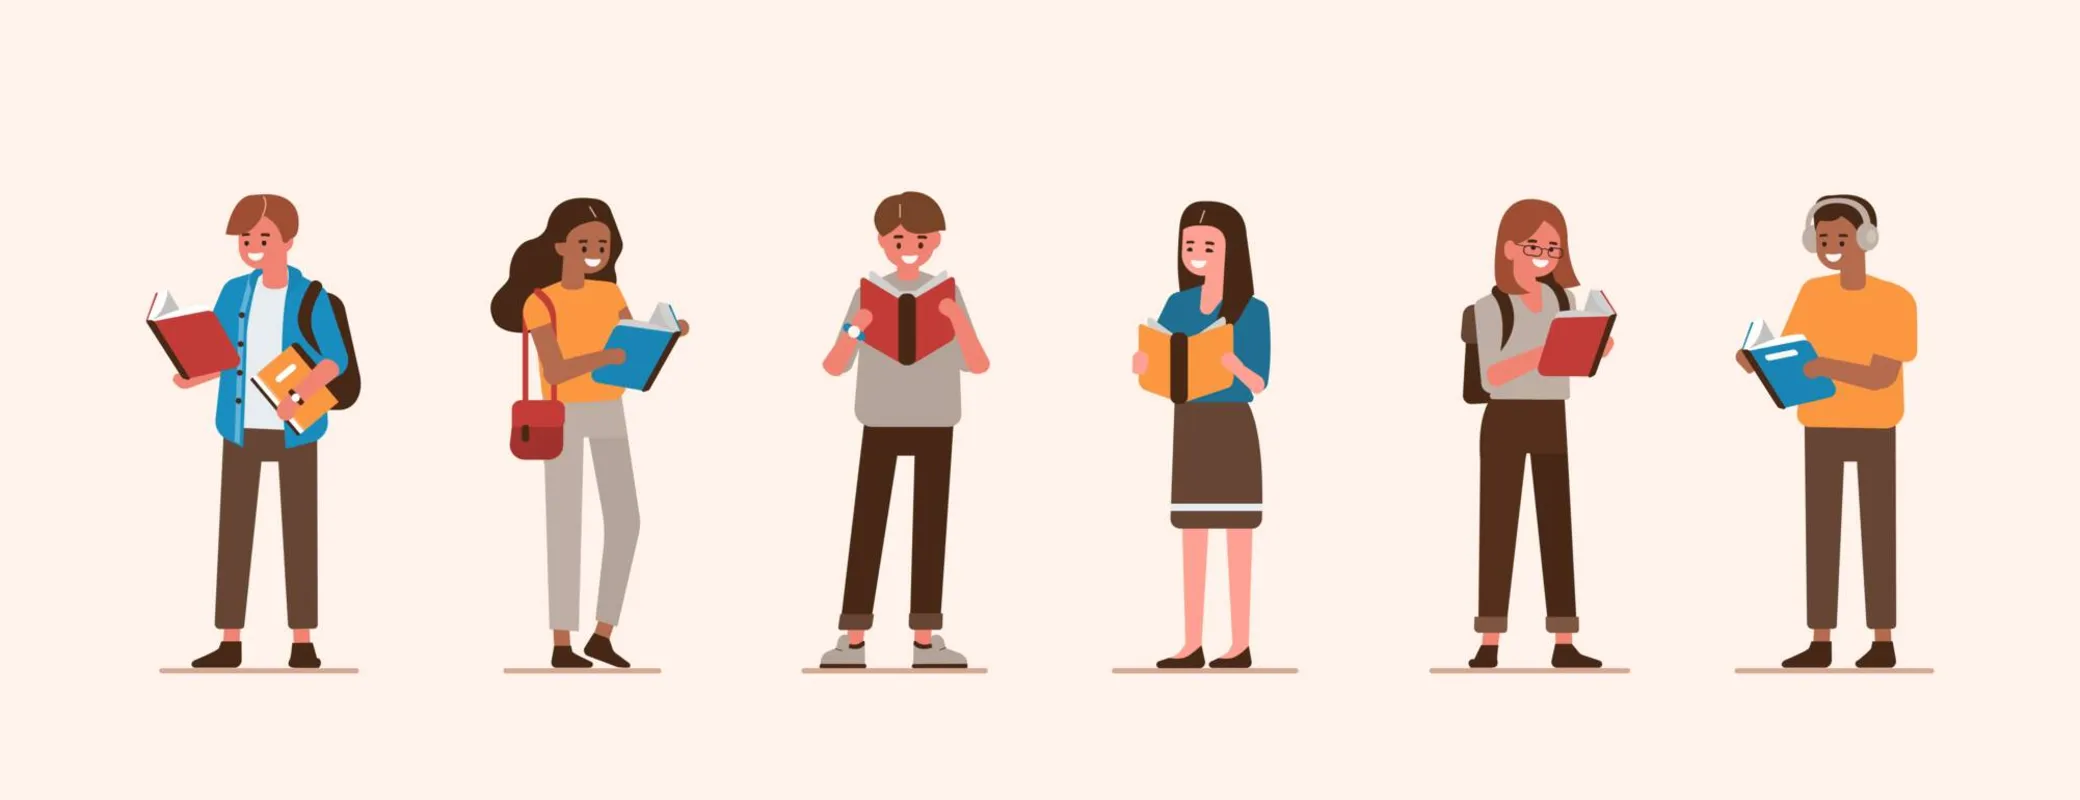 Young people love to read. Group of male and female students with open books in hands. Man and woman characters study together. Education concept. Flat cartoon vector illustration isolated.